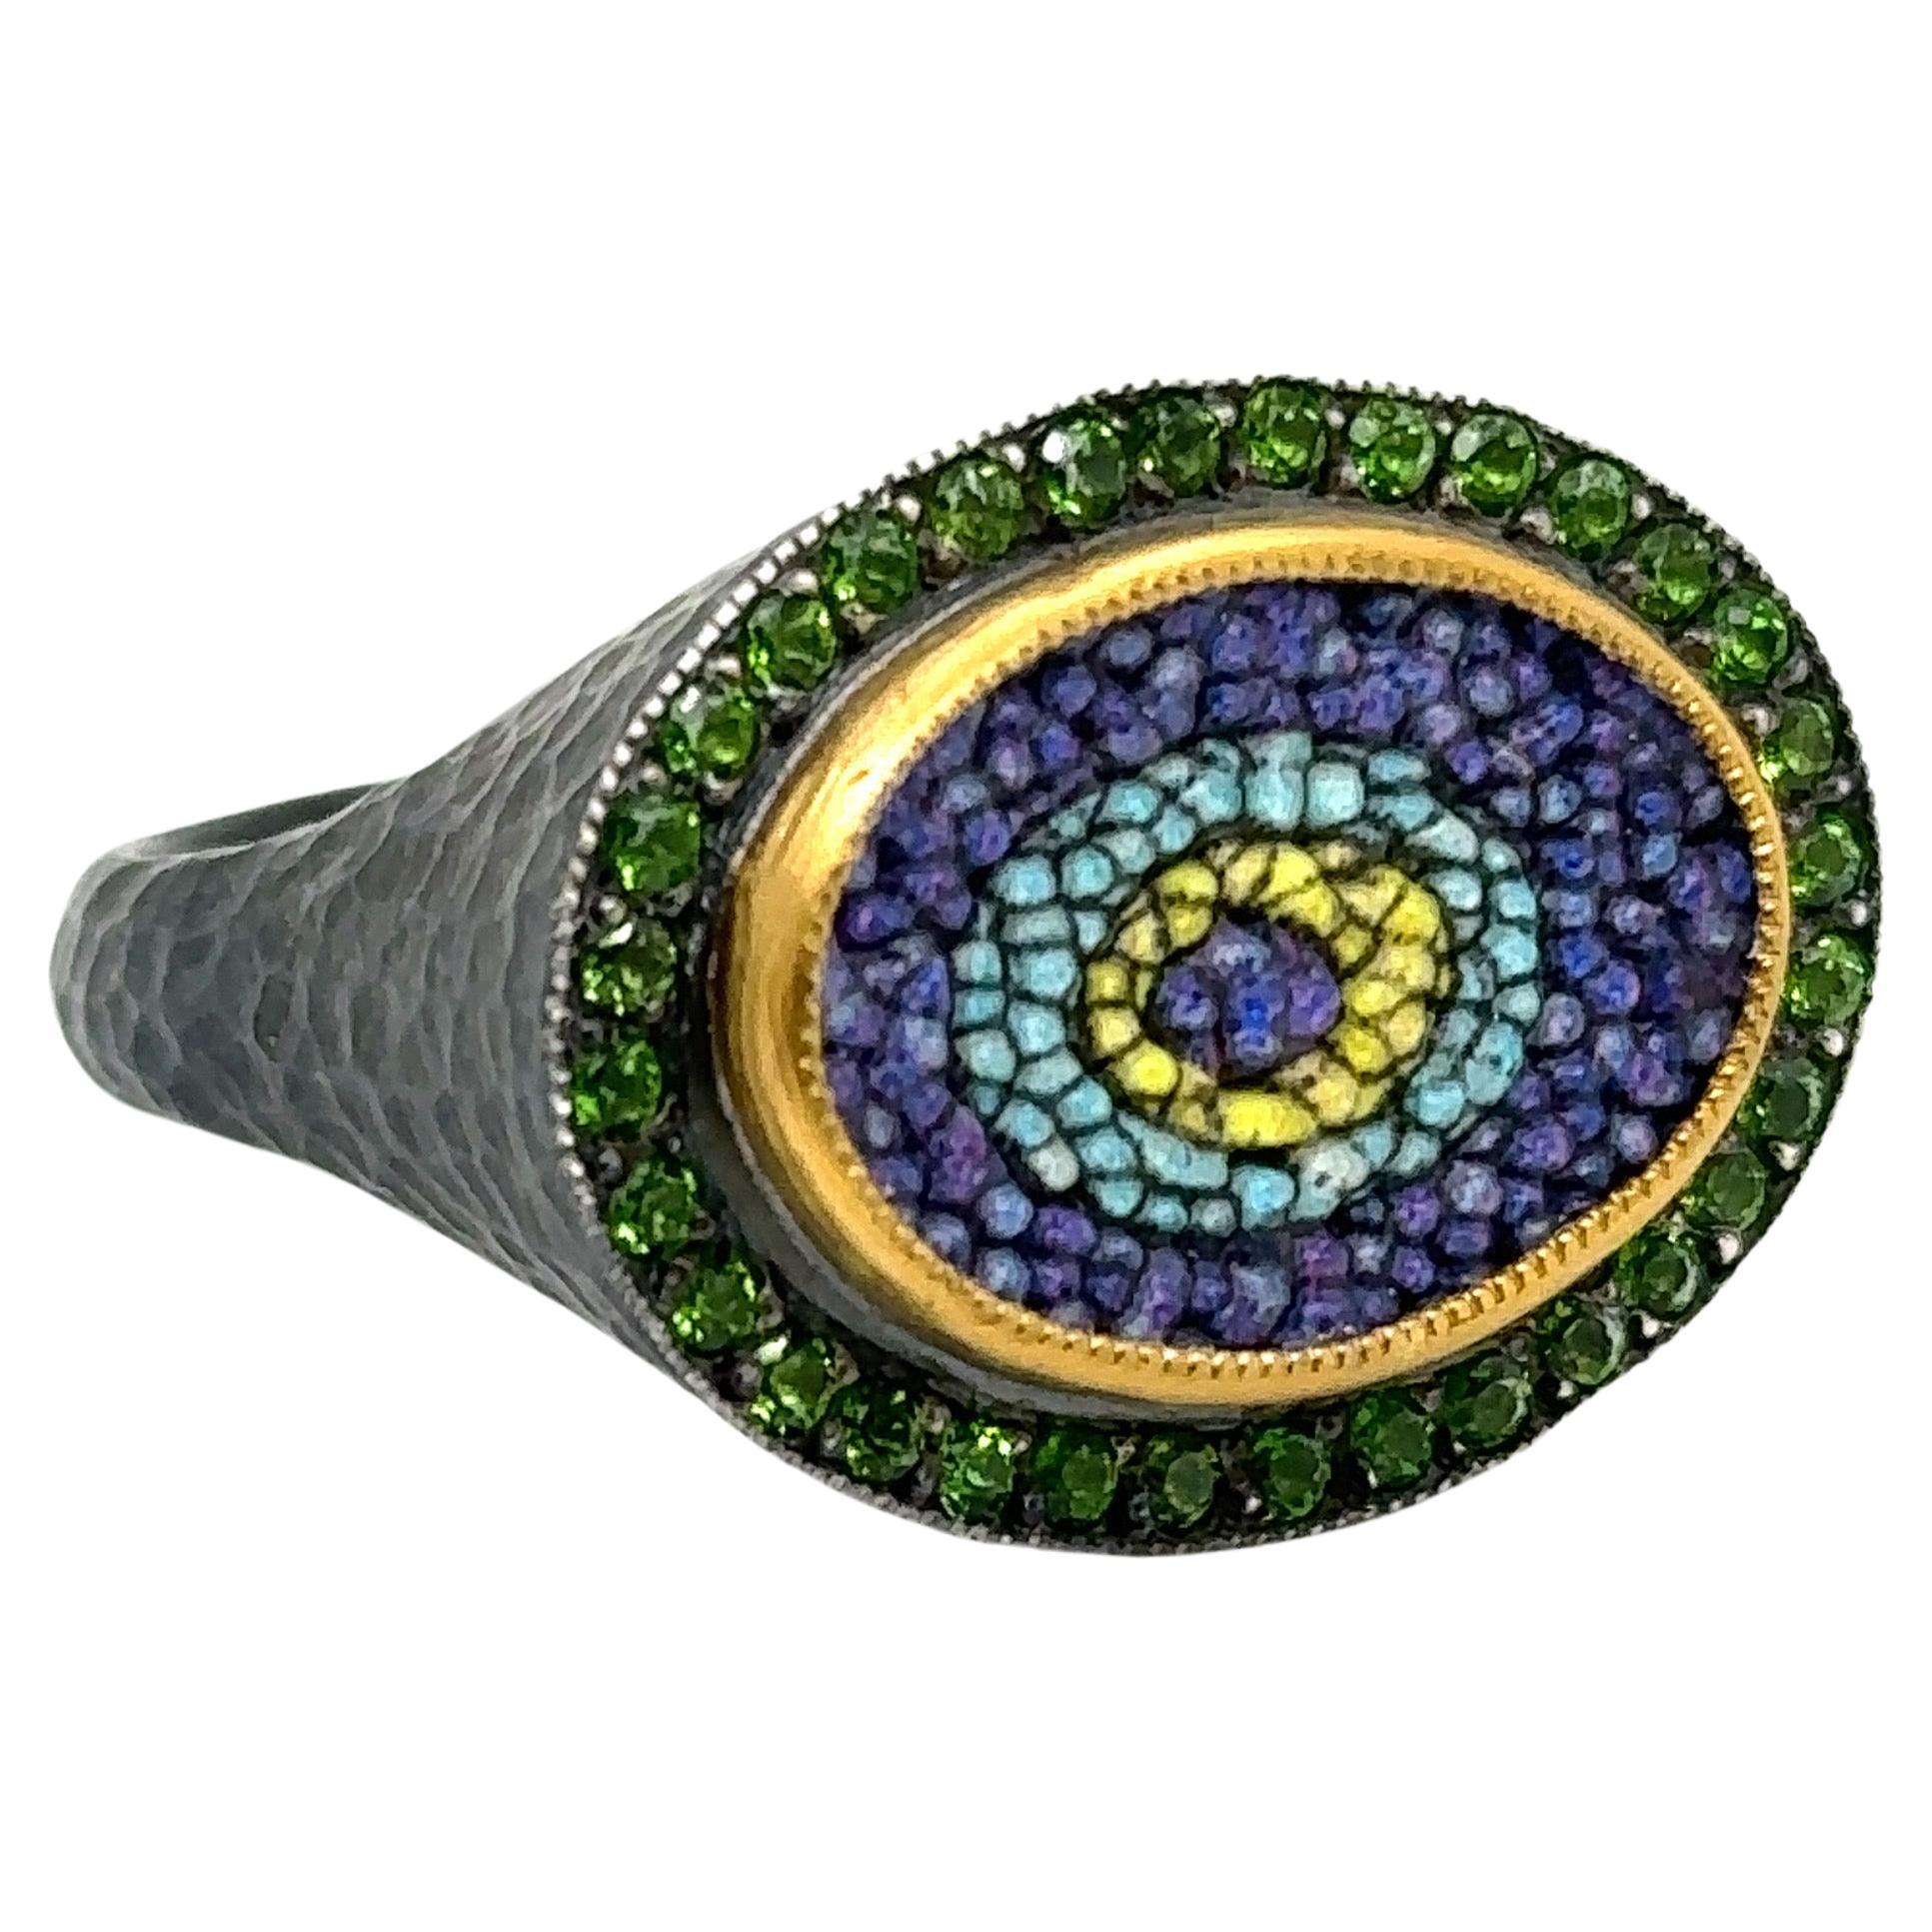 JAS-19-1965 - 24KT GOLD/SS EVIL EYE MOSAIC RING with 0.60CT CHROME DIOPSIDES For Sale